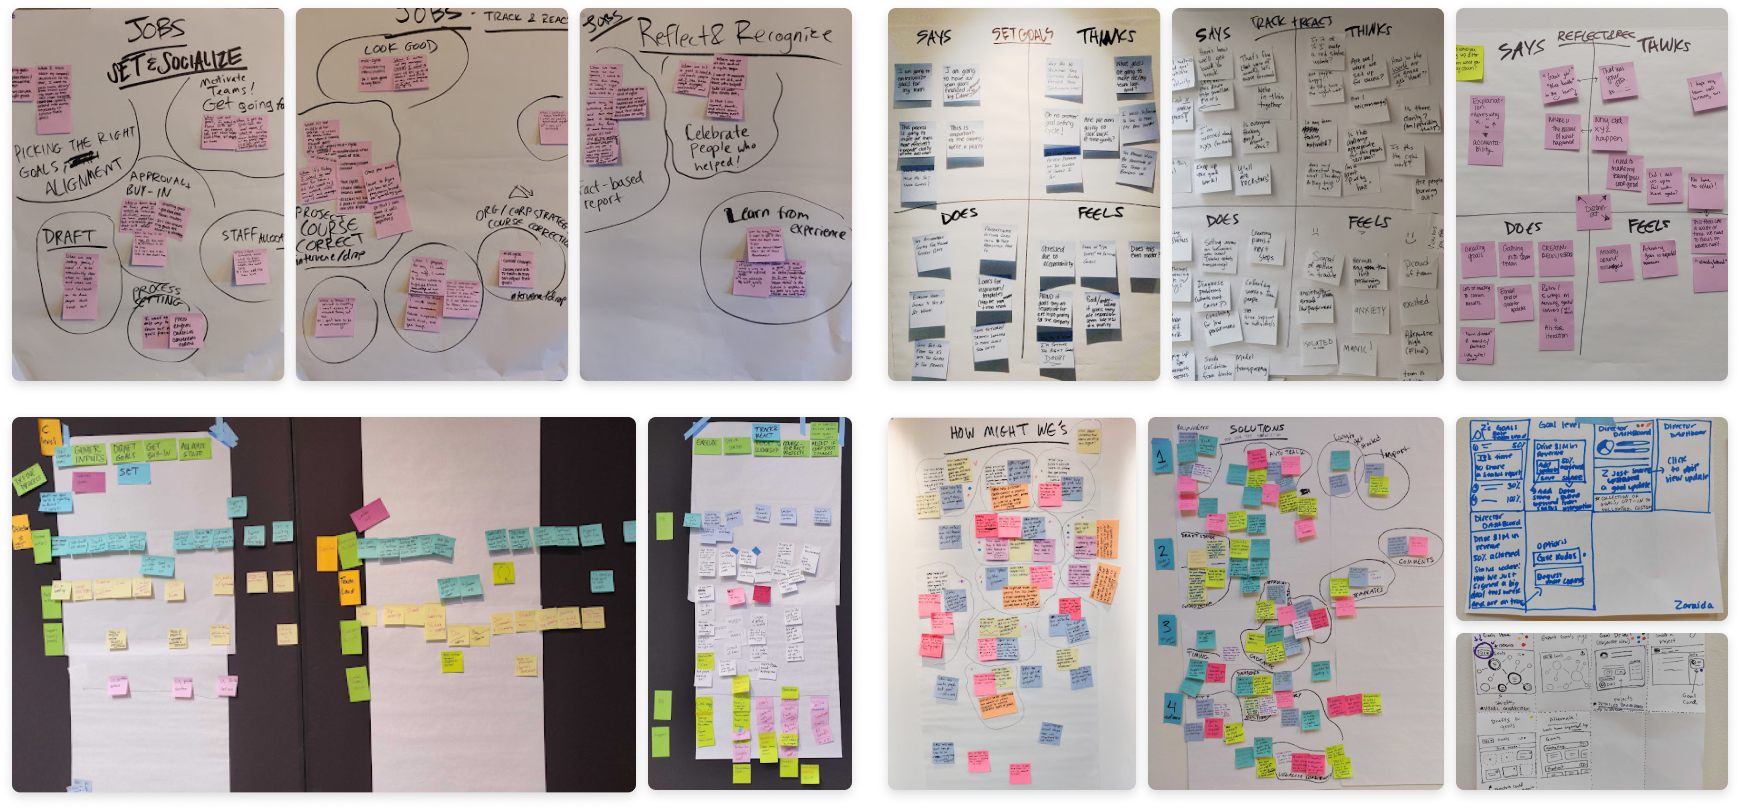 Work from the design sprint